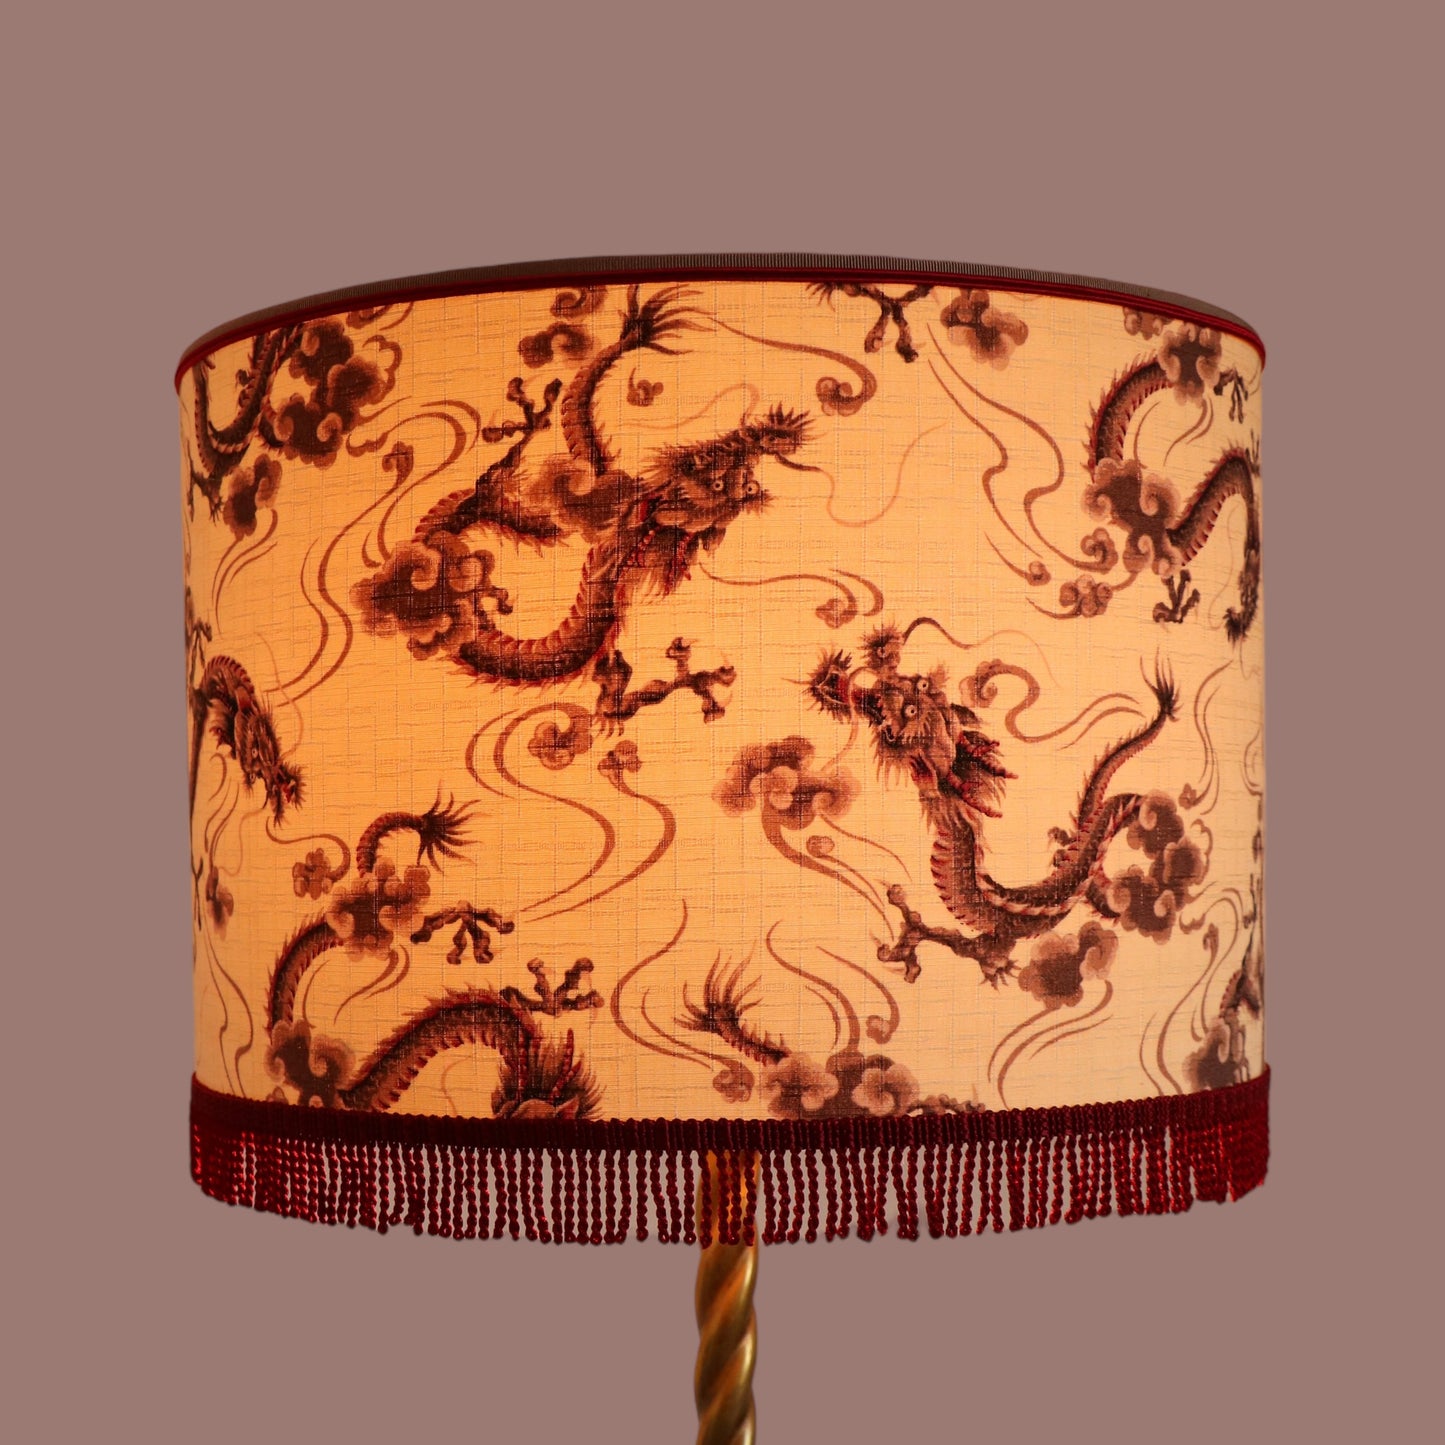 DRAGONS lampshade laminated in Japanese fabric, ref D1